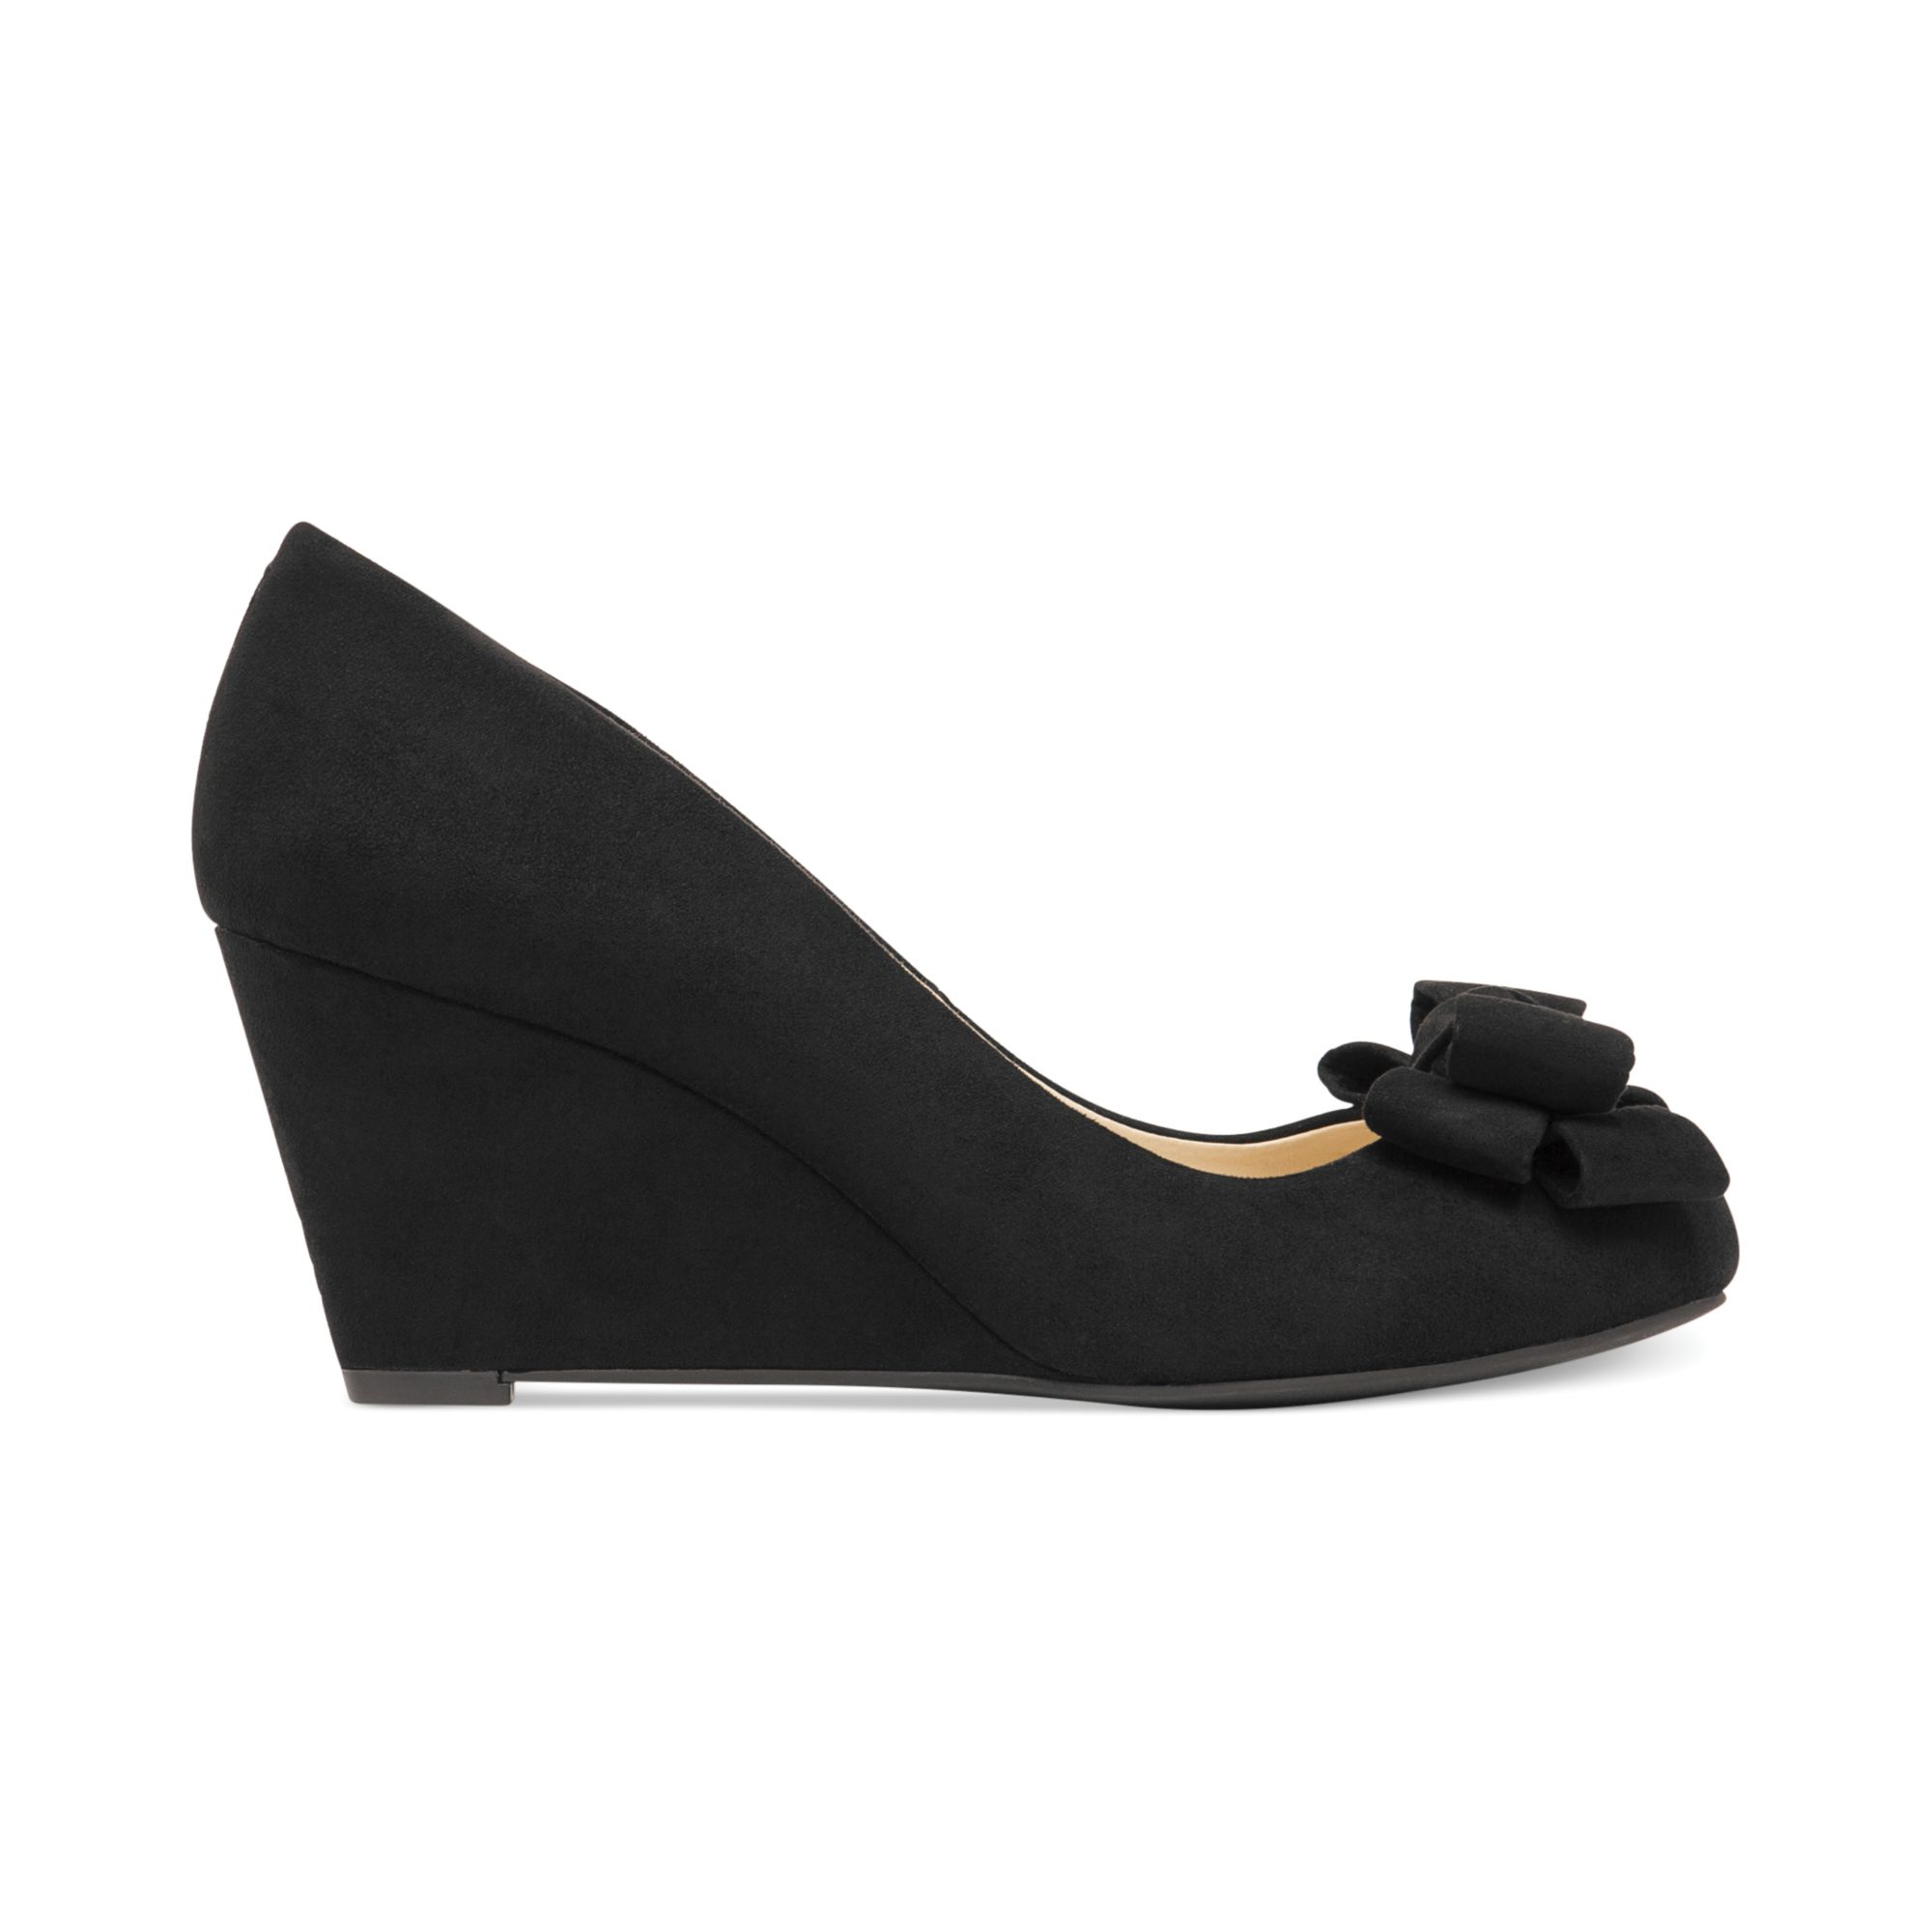 Jessica Simpson Sheryl Bow Wedges in Black (Black Suede) | Lyst